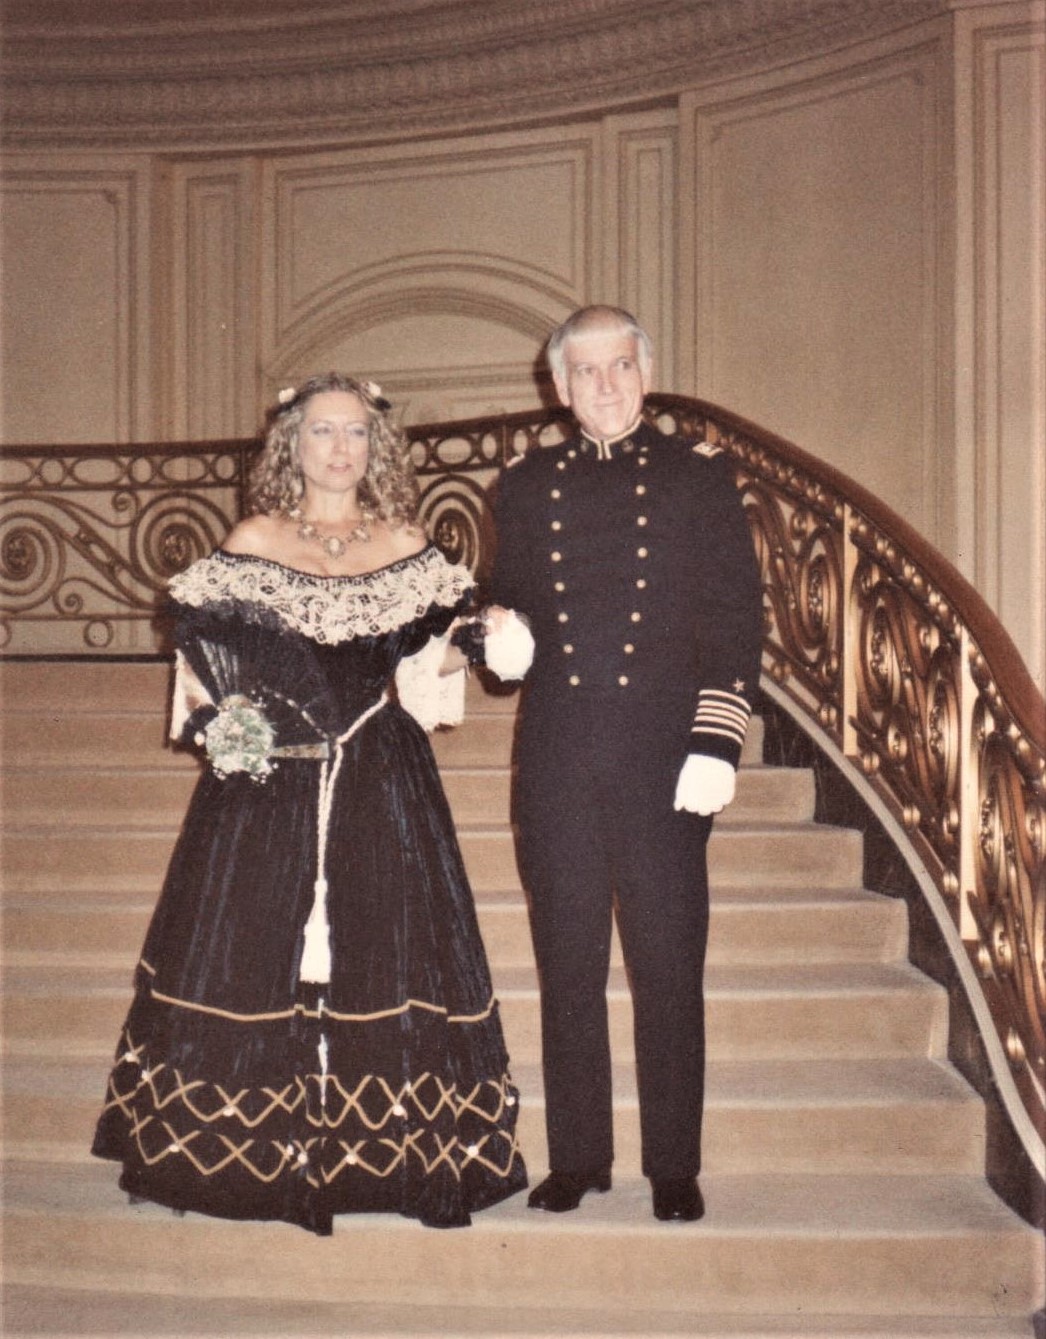 Paul & Neola on one of the rare occasions we could convince him to dress up in a historical costume for a Victorian Ball in San Diego.